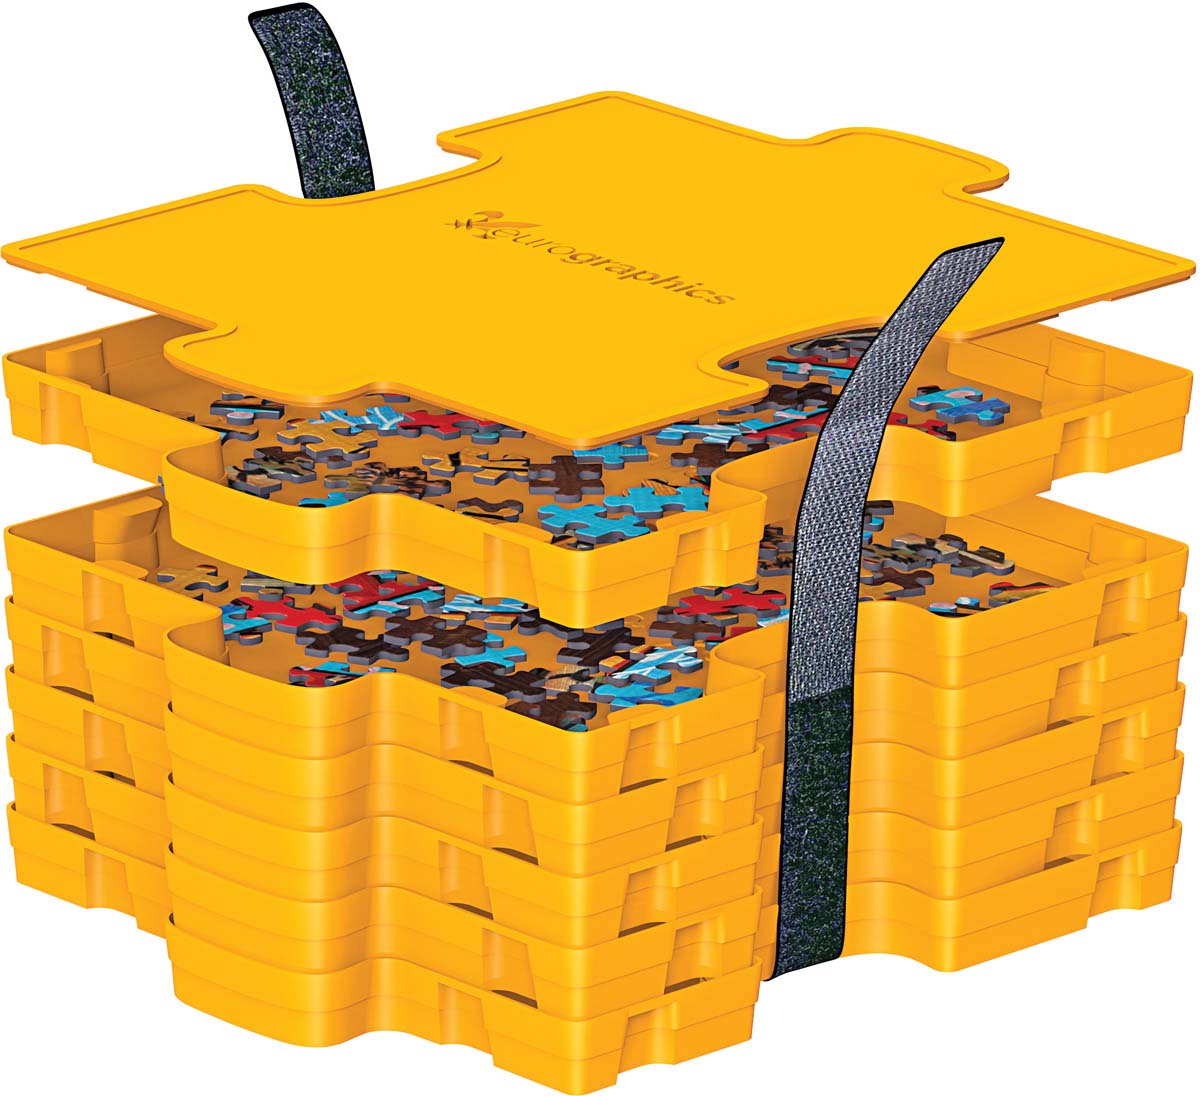  PUZZLE EZ 8 Puzzle Sorting Trays with Lid 8 x 8 with